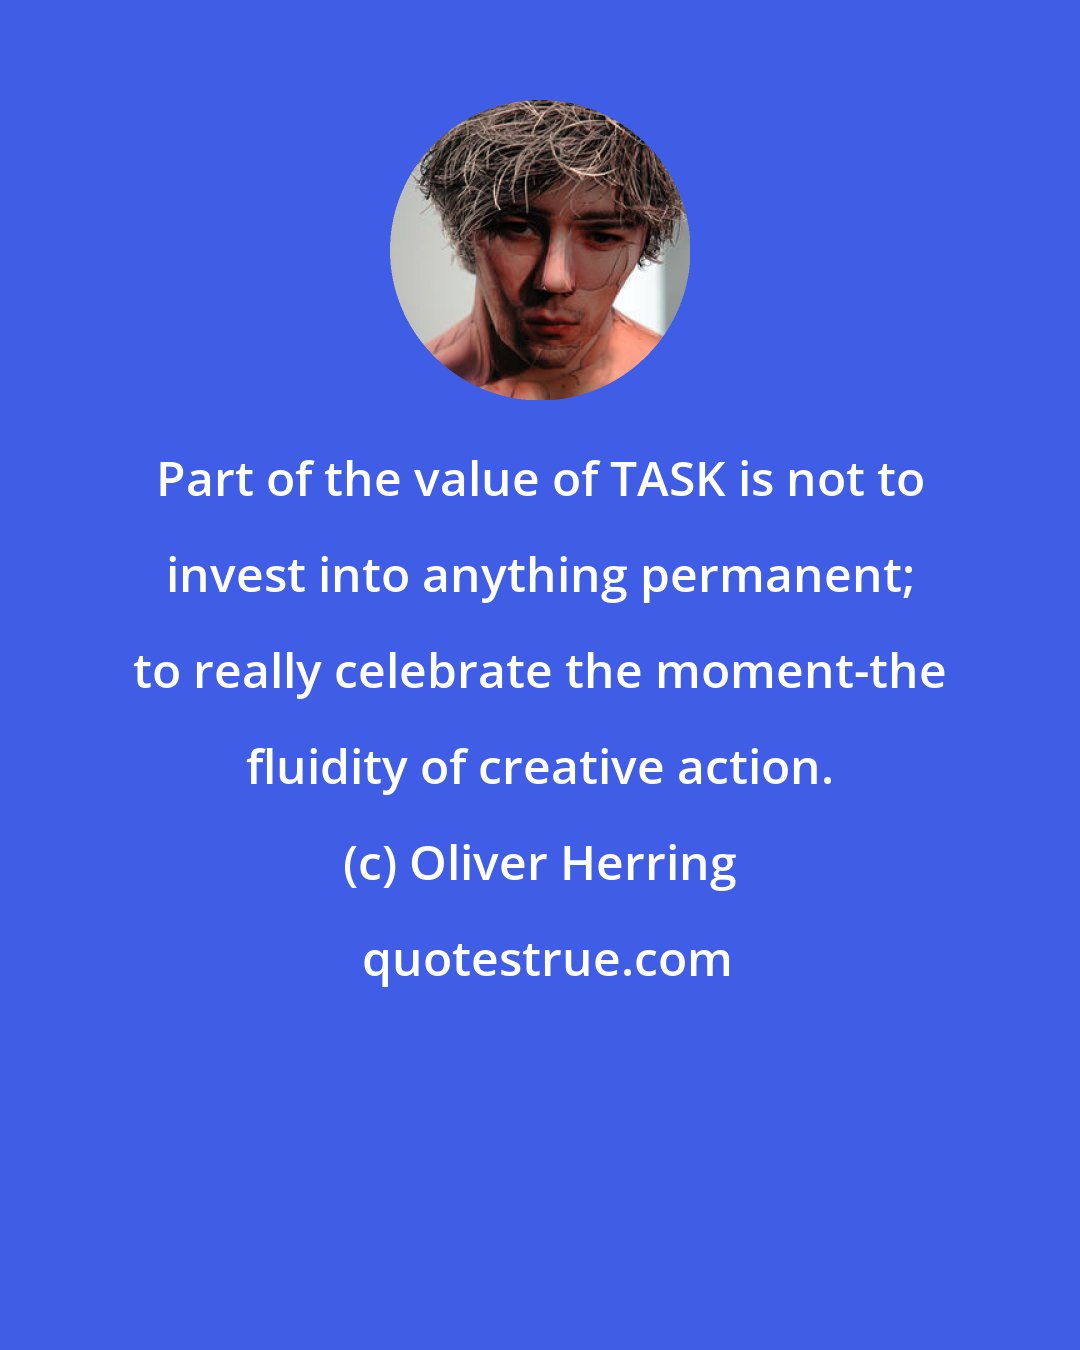 Oliver Herring: Part of the value of TASK is not to invest into anything permanent; to really celebrate the moment-the fluidity of creative action.